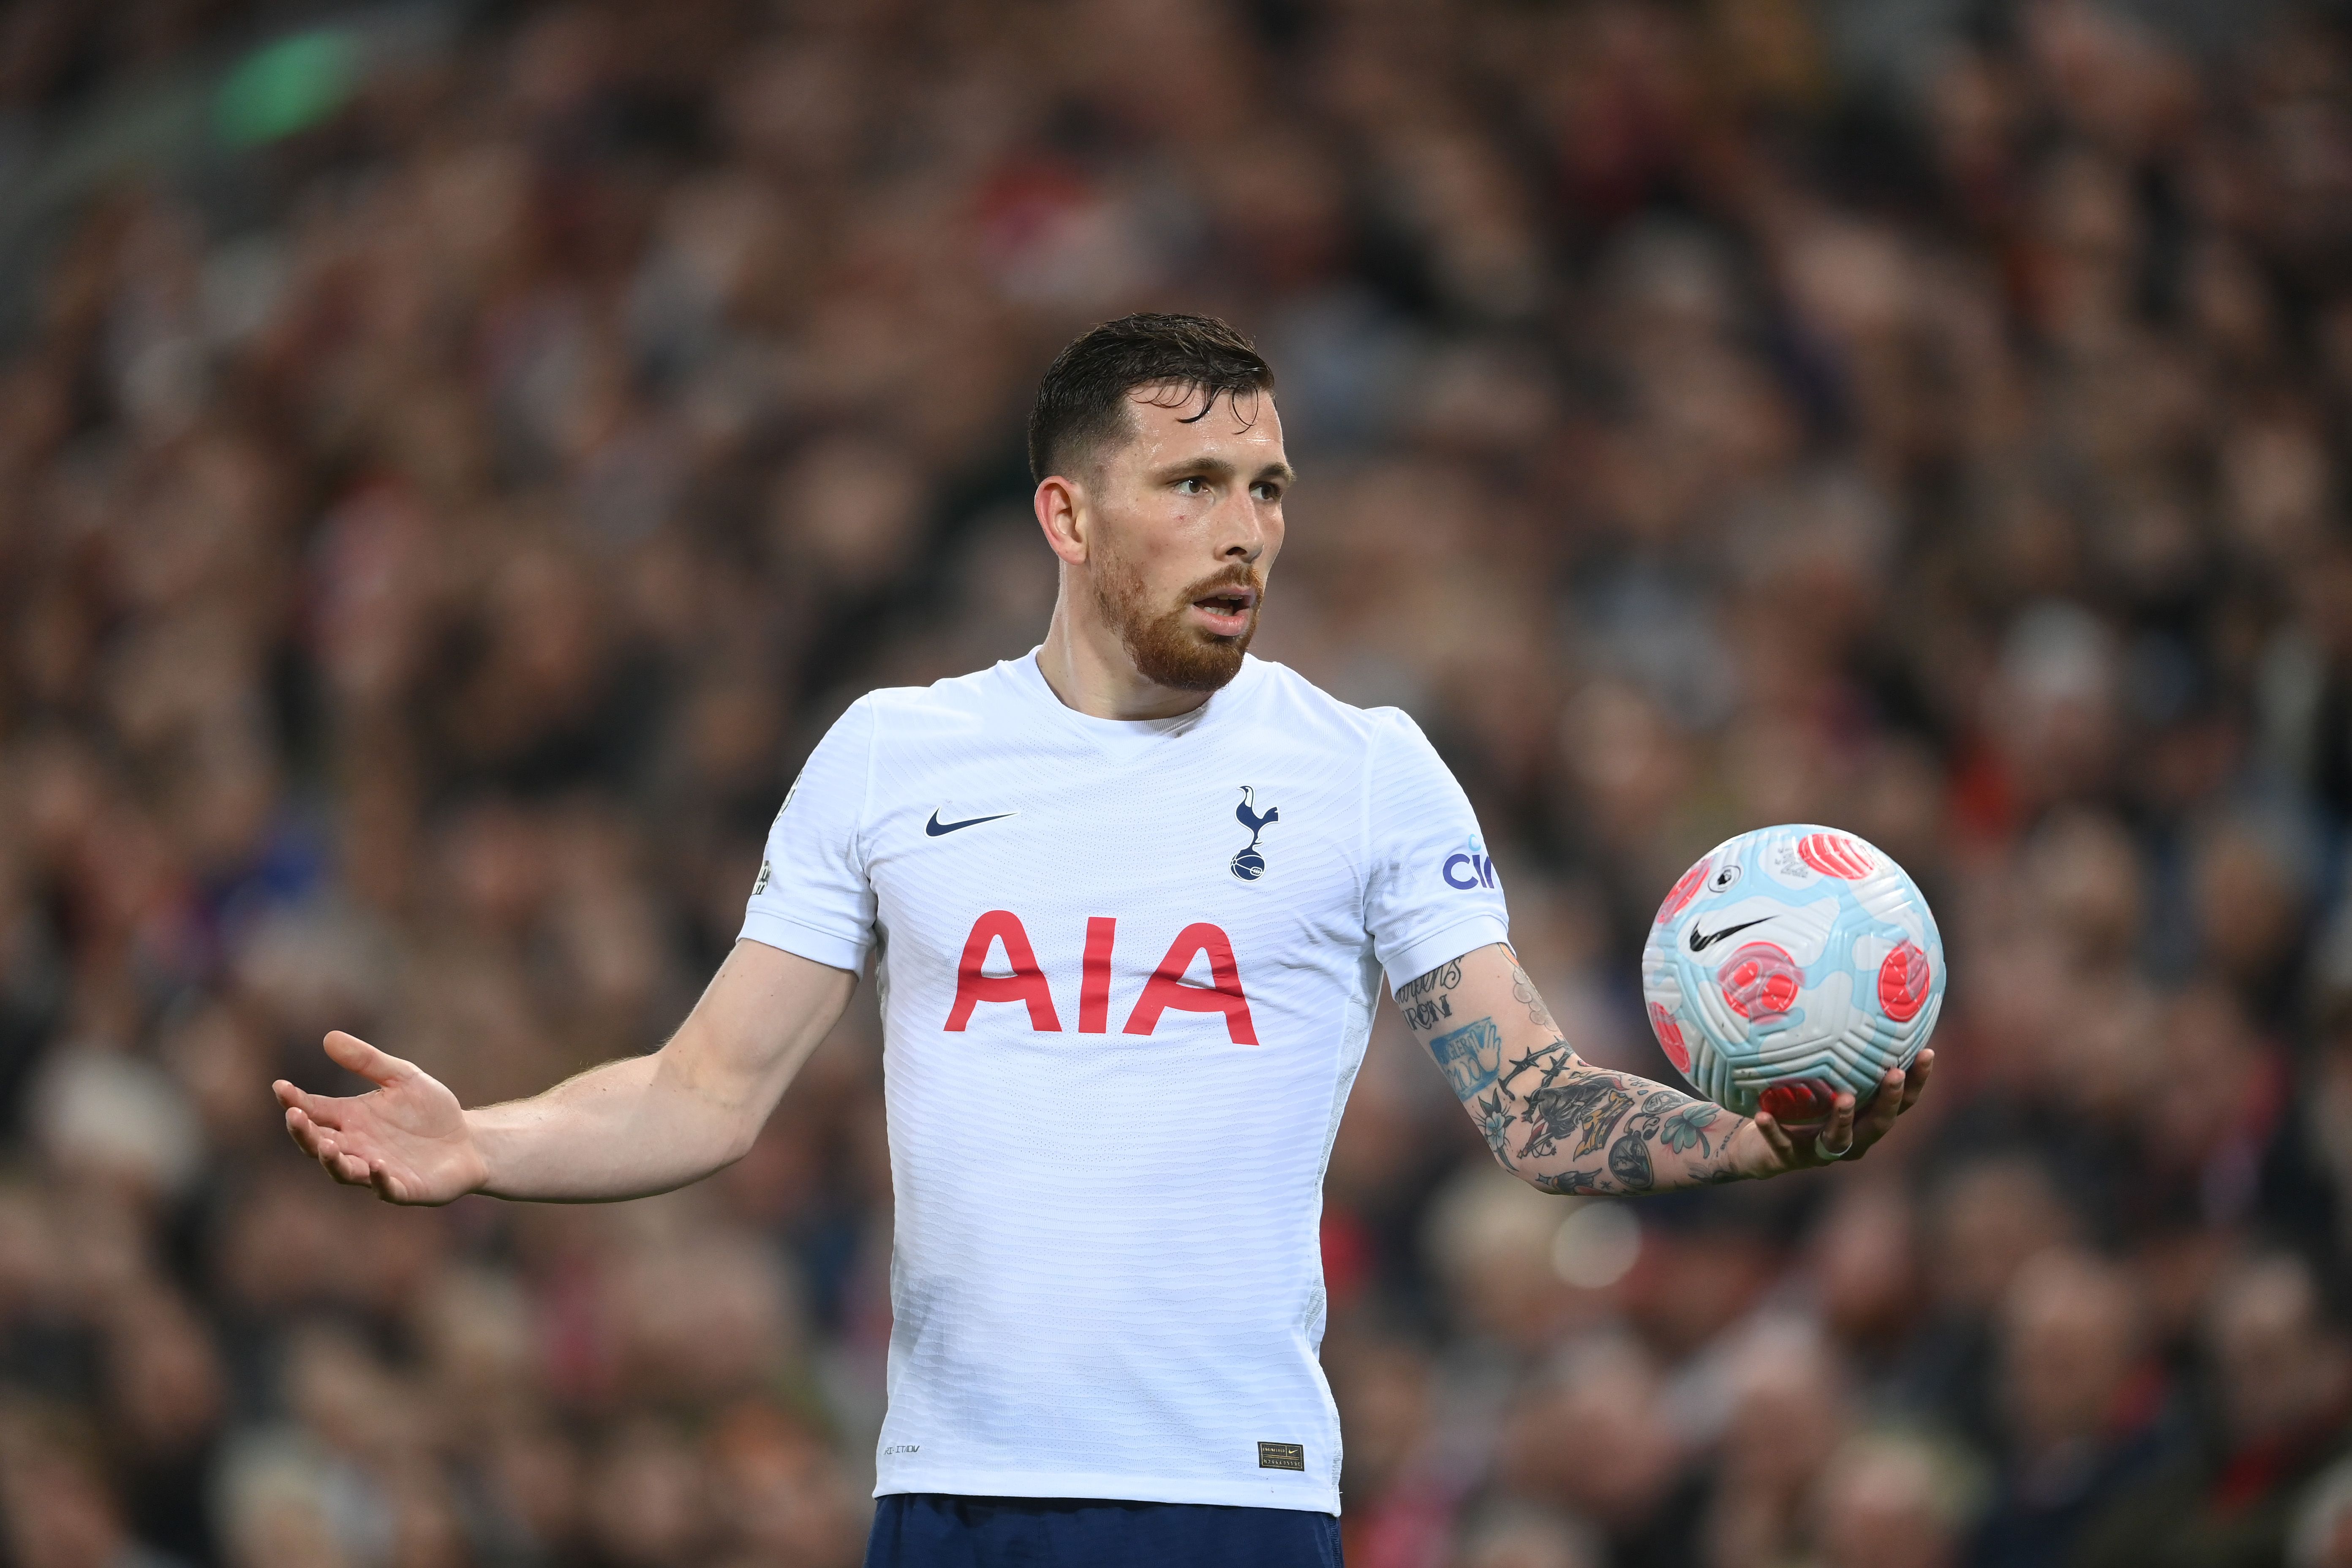 Pierre-Emile Hojbjerg of Tottenham Hotspur holds the ball during the Premier League match between Liverpool and Tottenham Hotspur at Anfield on May 07, 2022 in Liverpool, England